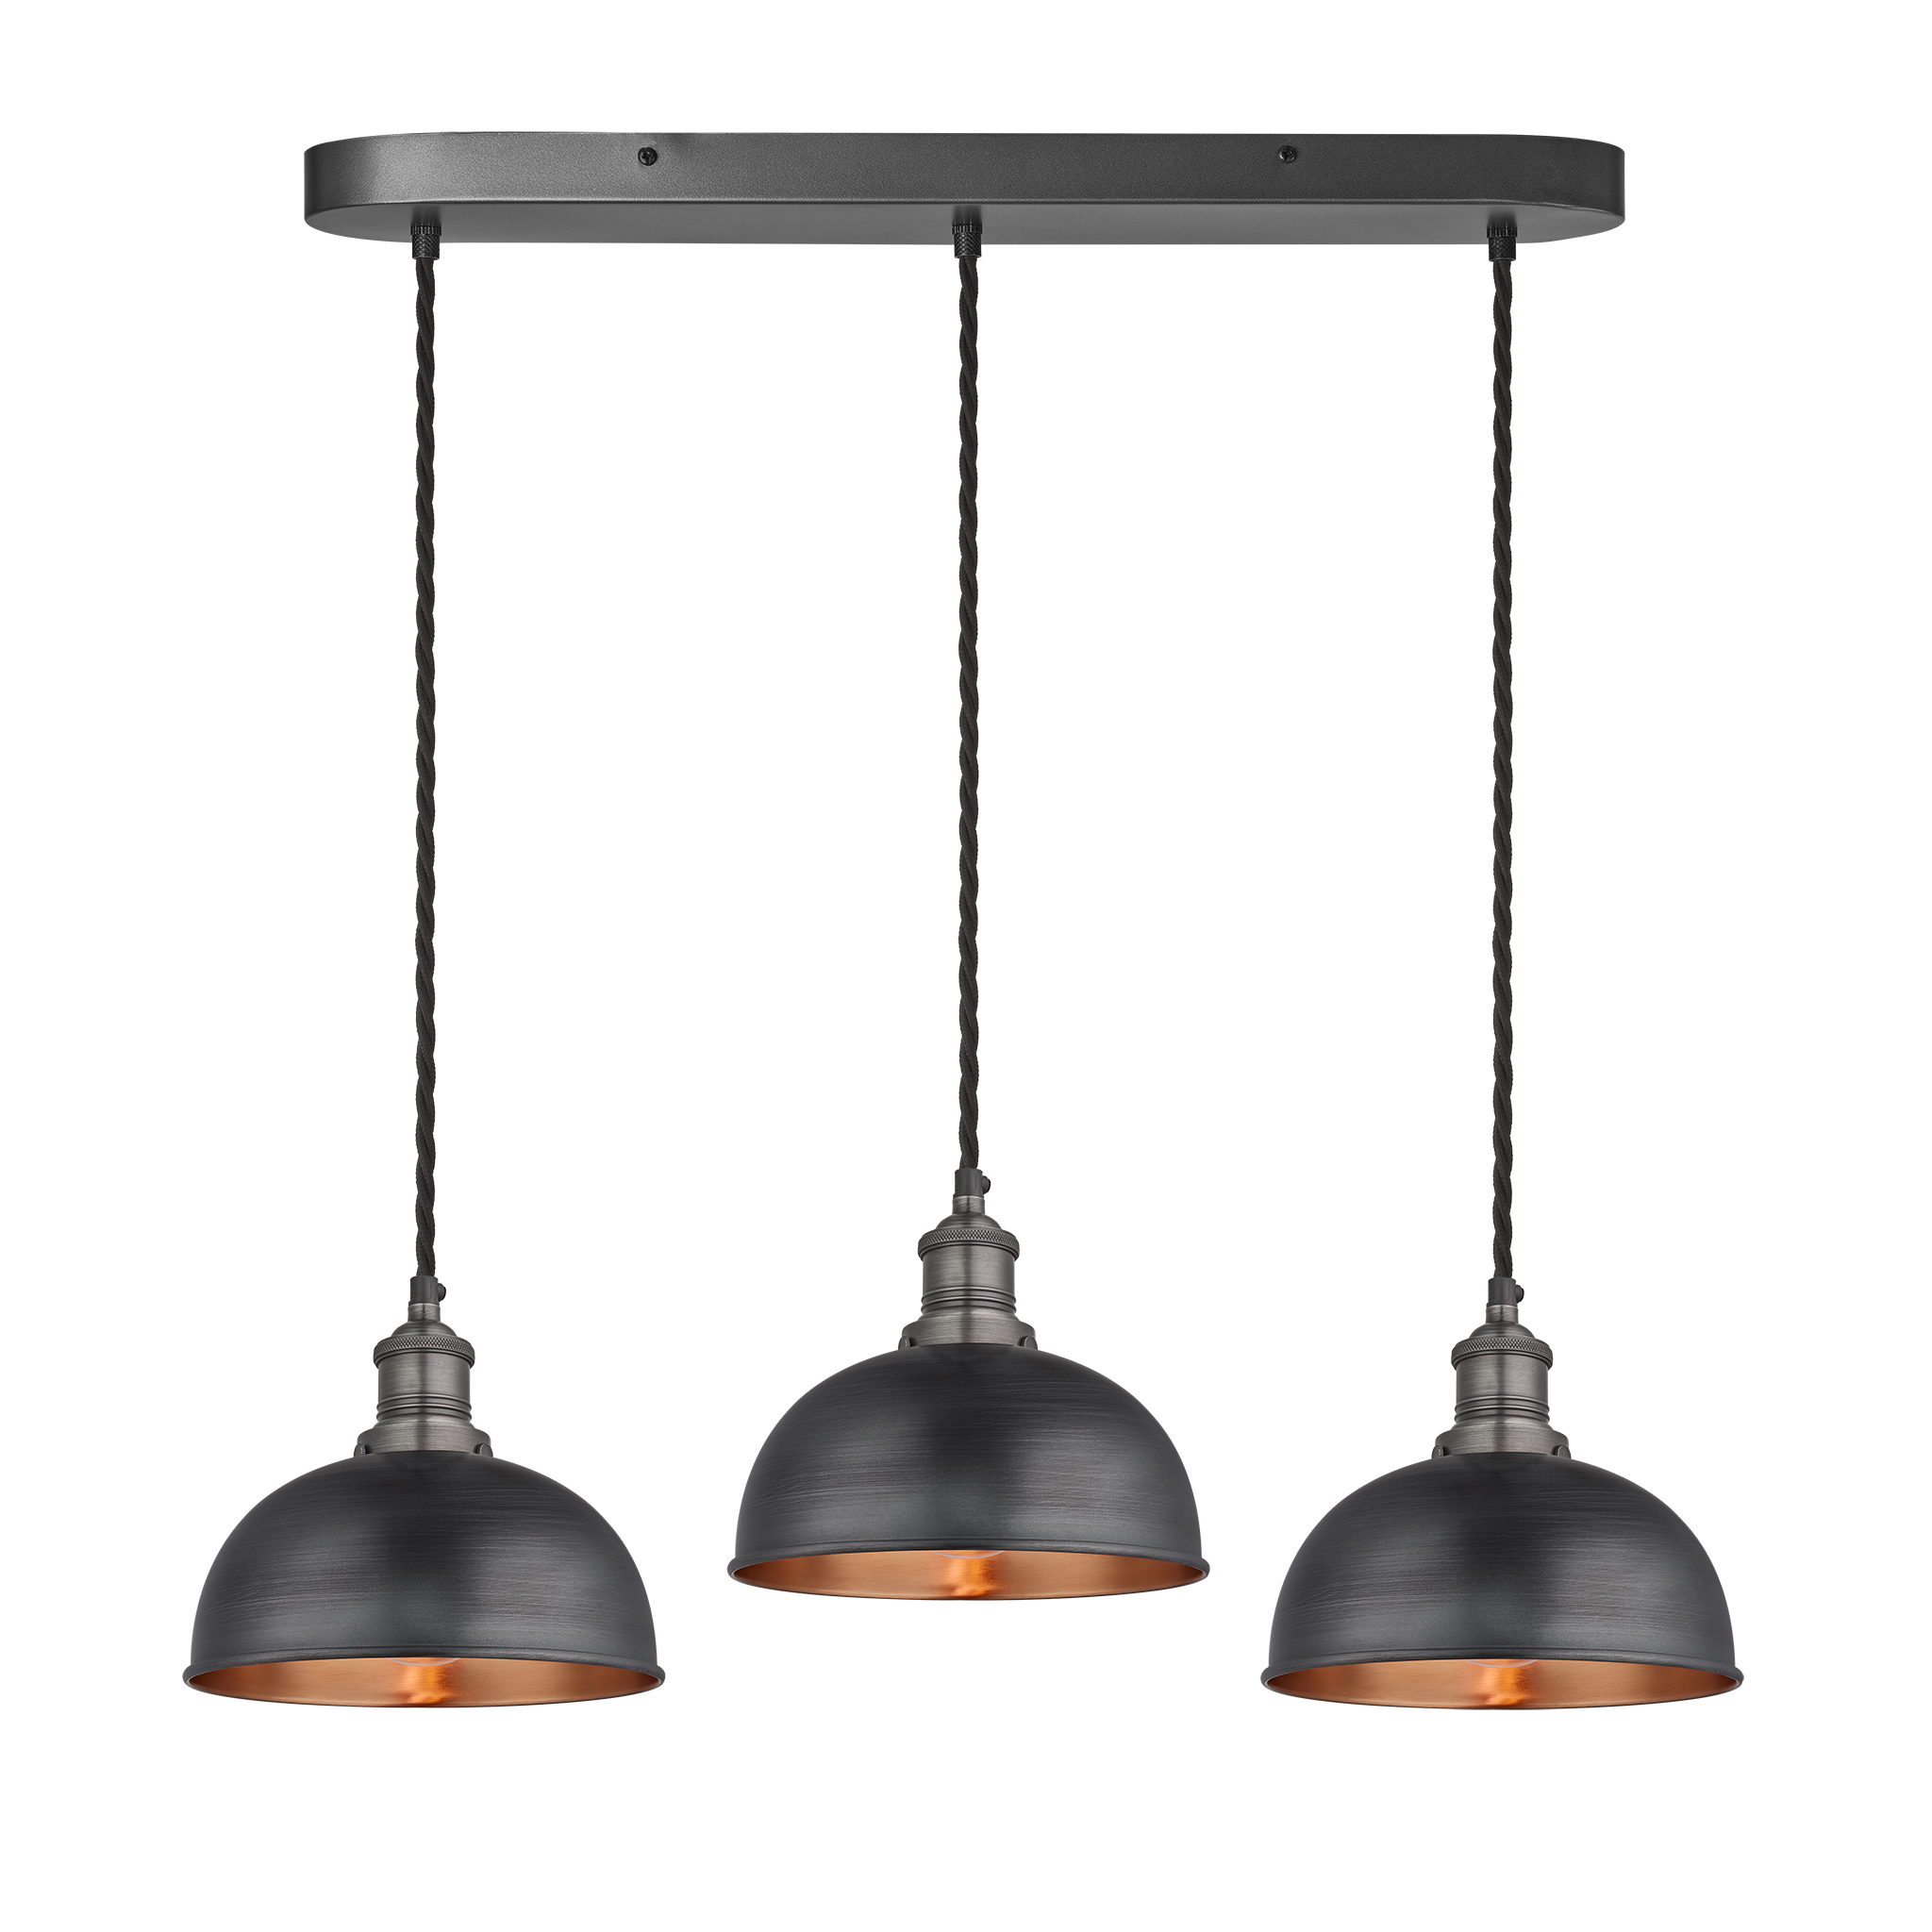 8-Inch_Pendant_Pewter_Copper_Industville_Lighting_Dome_PewterHolder_Brooklyn_BR-D8-3WOCL-CP-PH